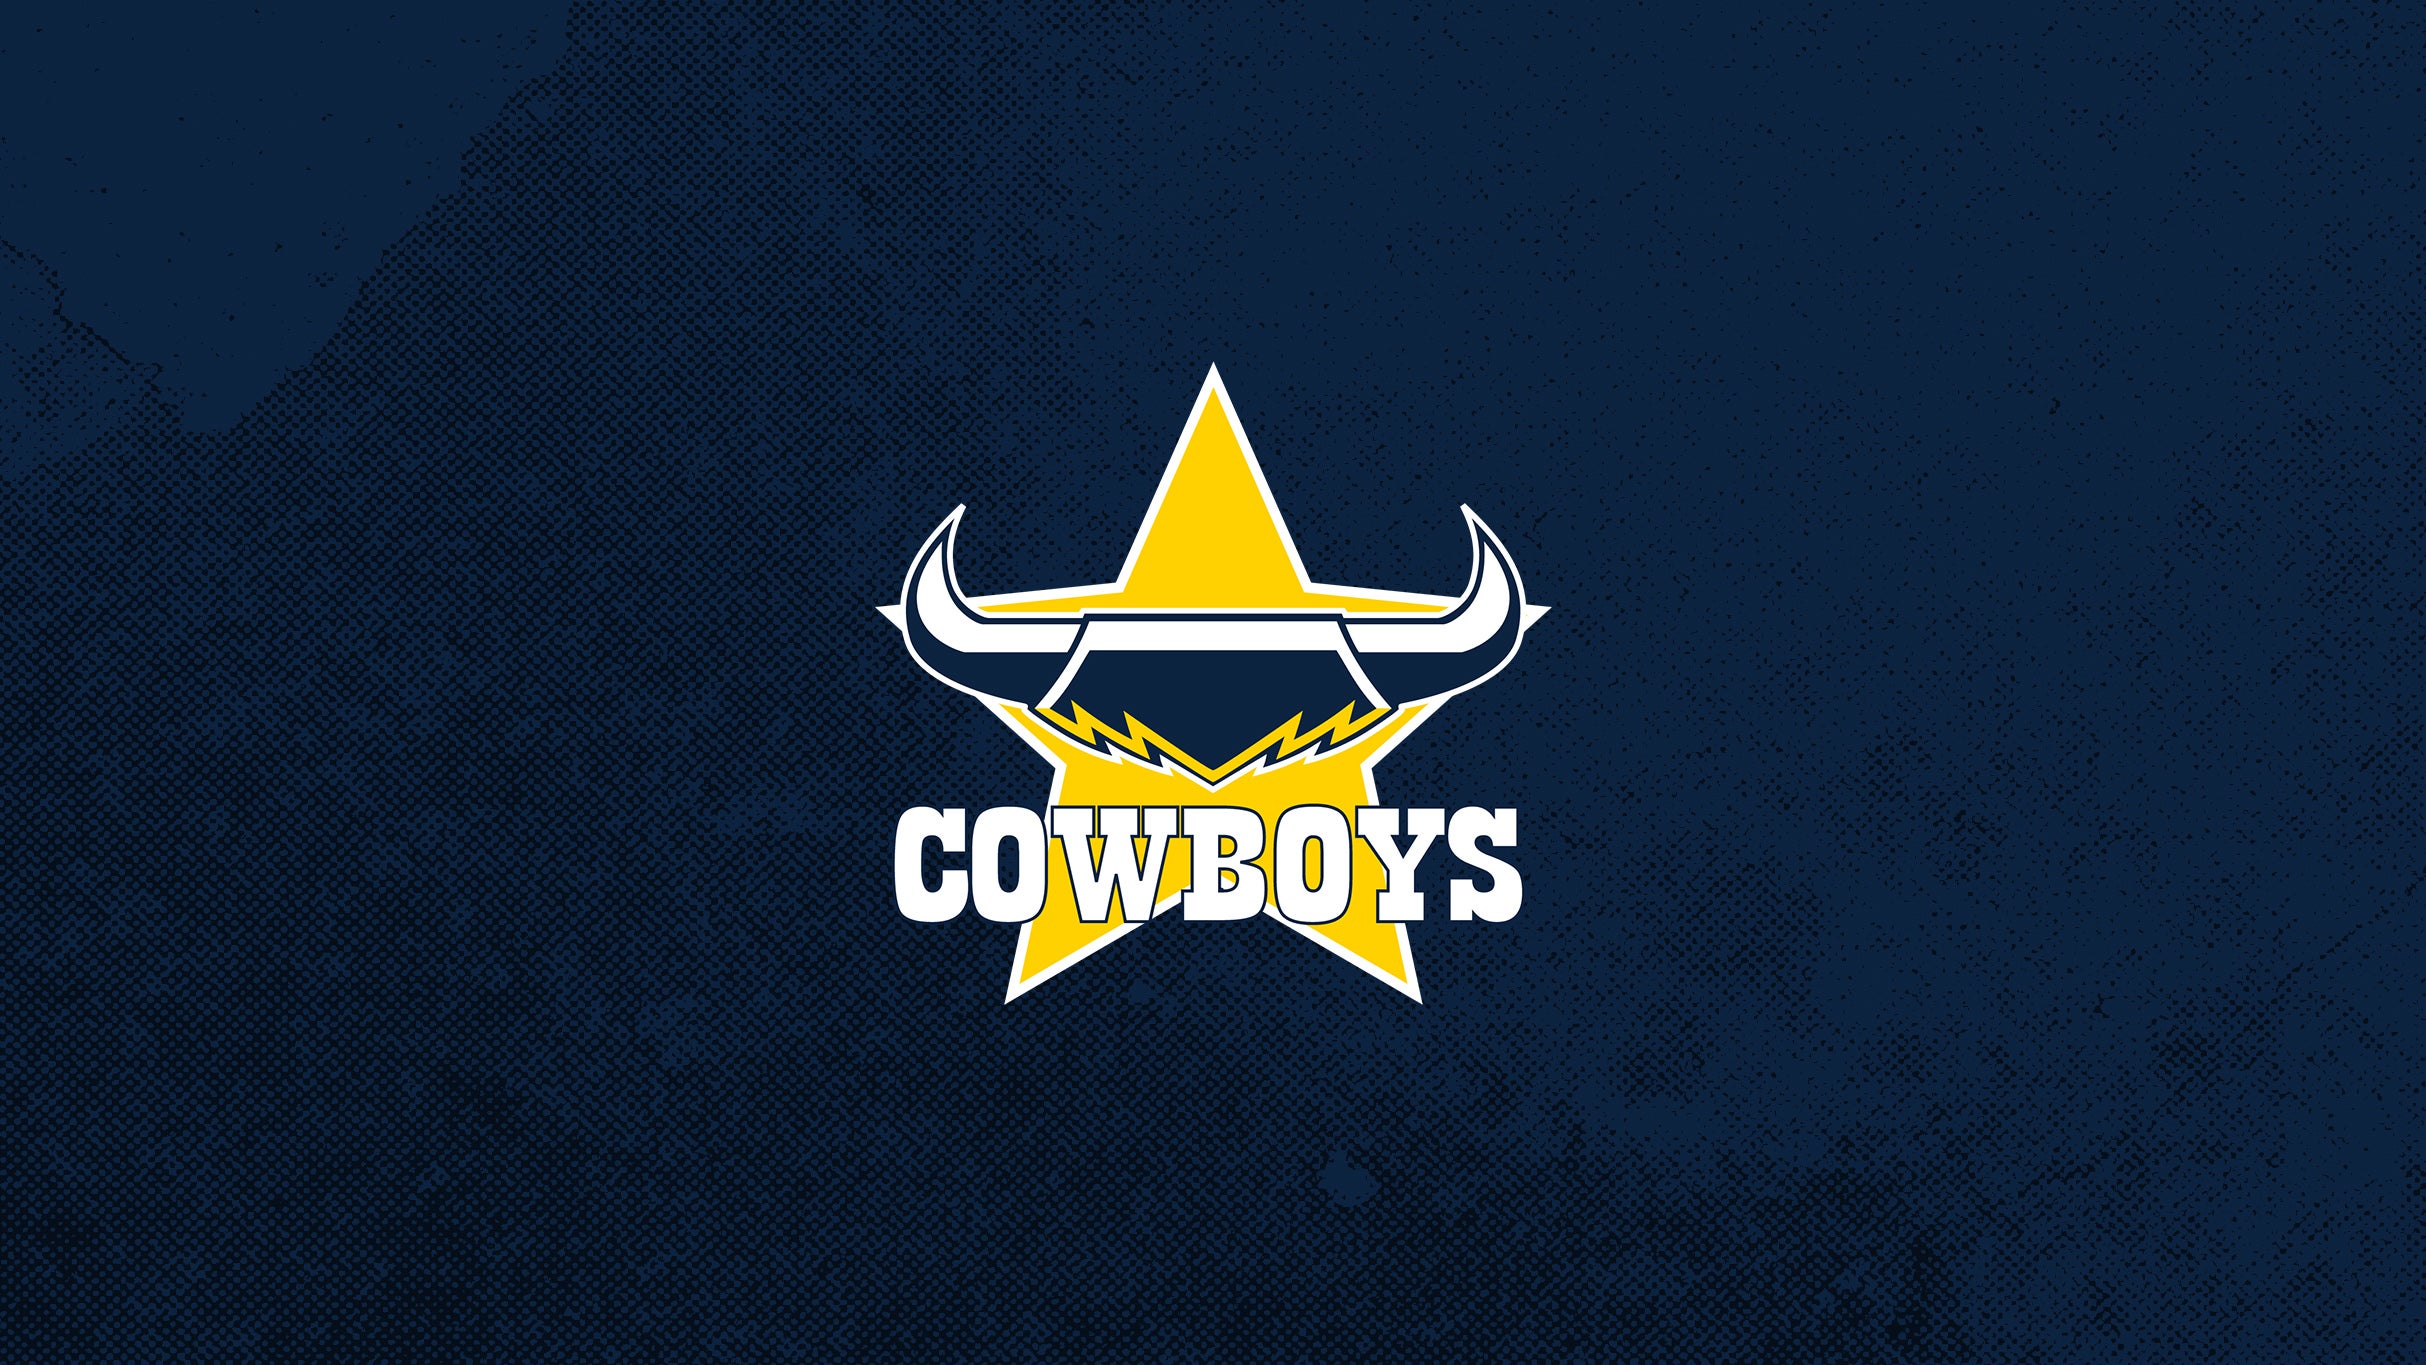 North Queensland Toyota Cowboys v Penrith Panthers (Round 16) in Townsville promo photo for Cowboys Members presale offer code